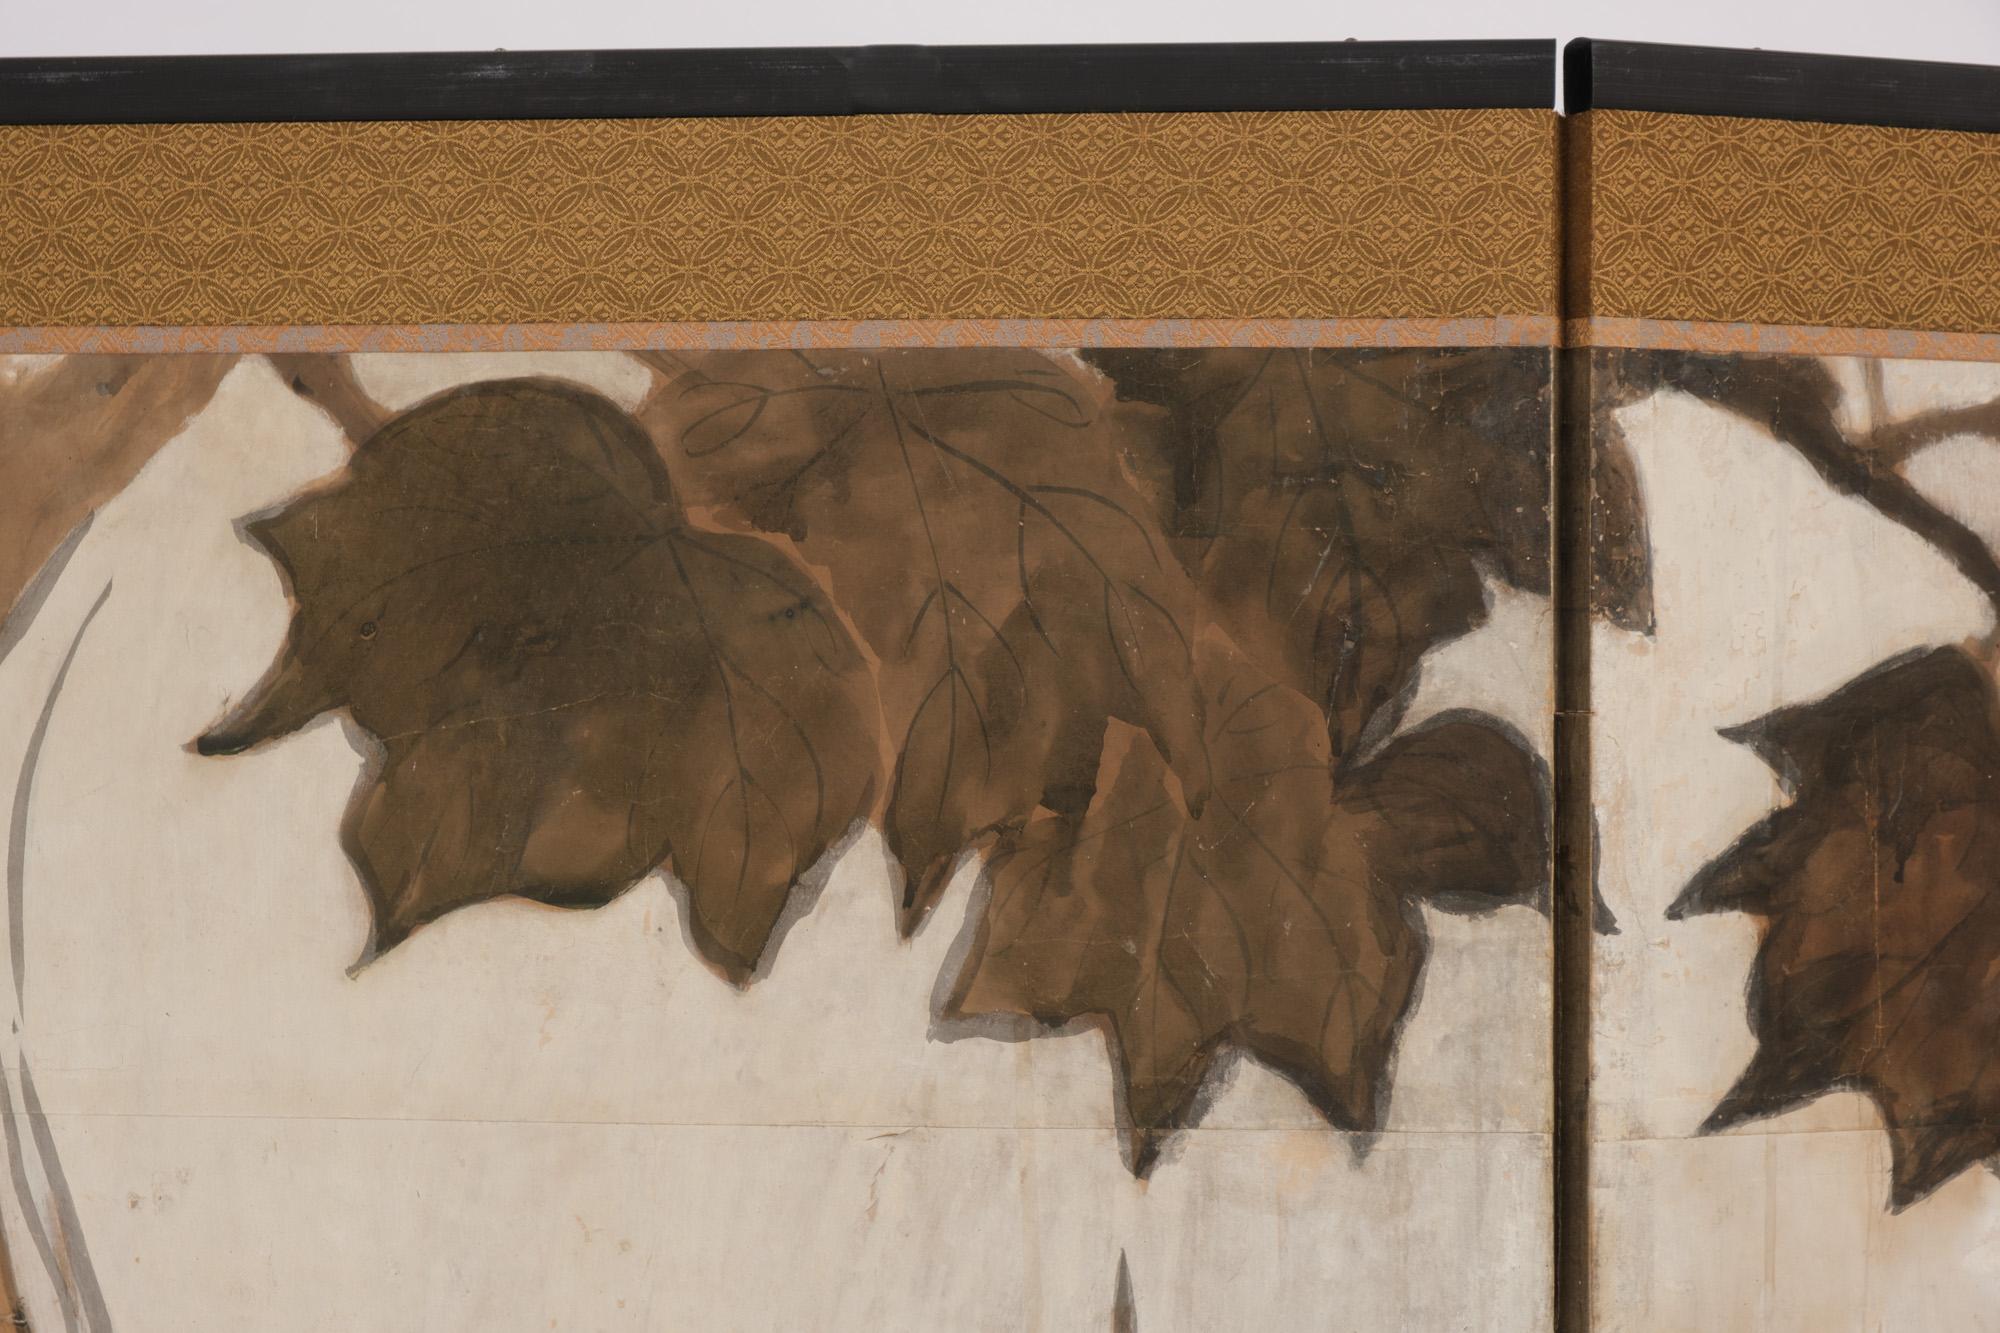 Japanese screen with a painting of an large elephant & monkey by Mori Kanson 森間村 10